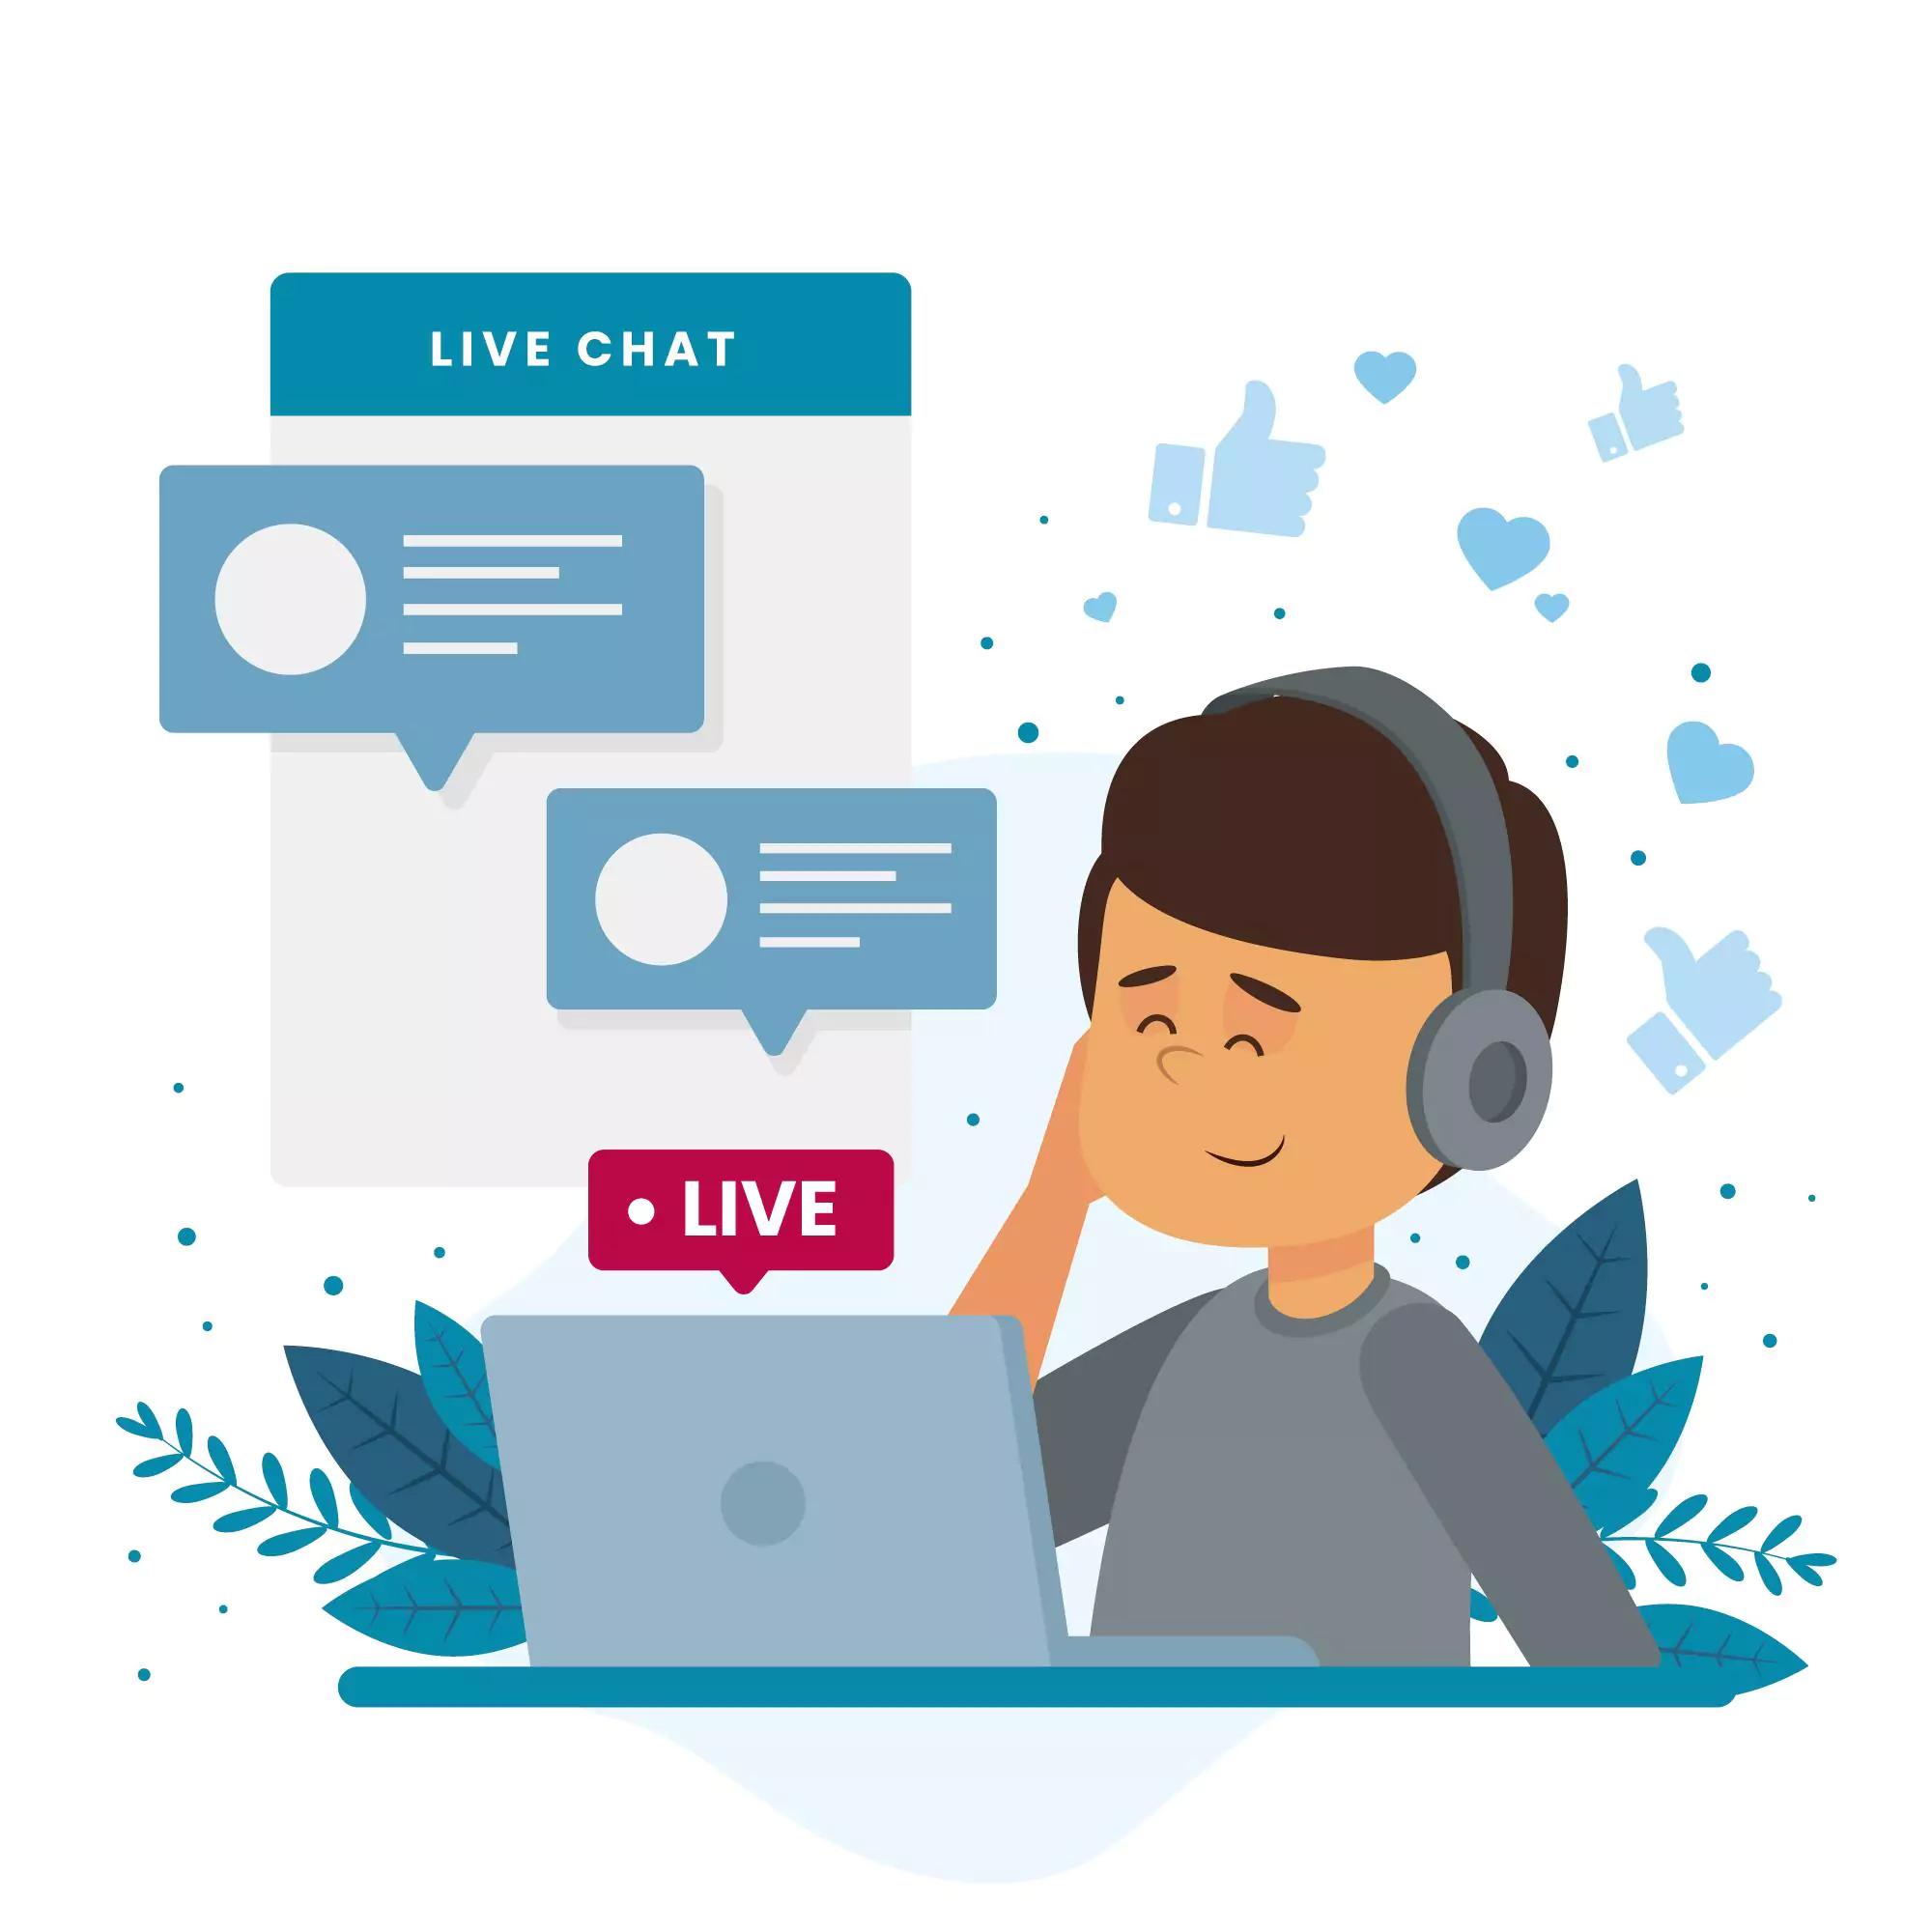 What is Live Chat?